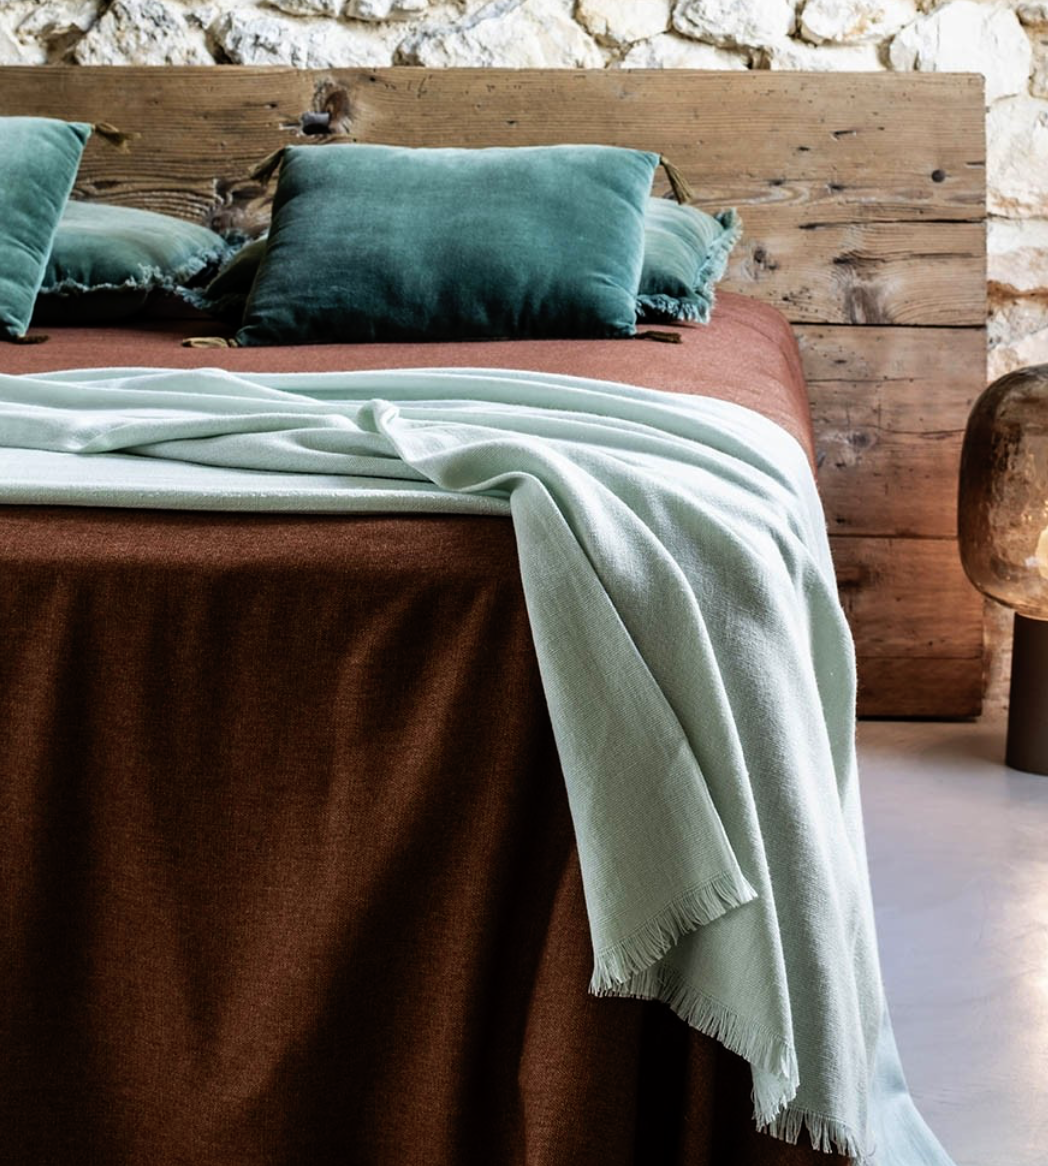 BVT Bedspread and extra fine blanket TOURFAN / 50% cashmere - 50% silk / 150 g / m² / 260 x 260 cm - Copy